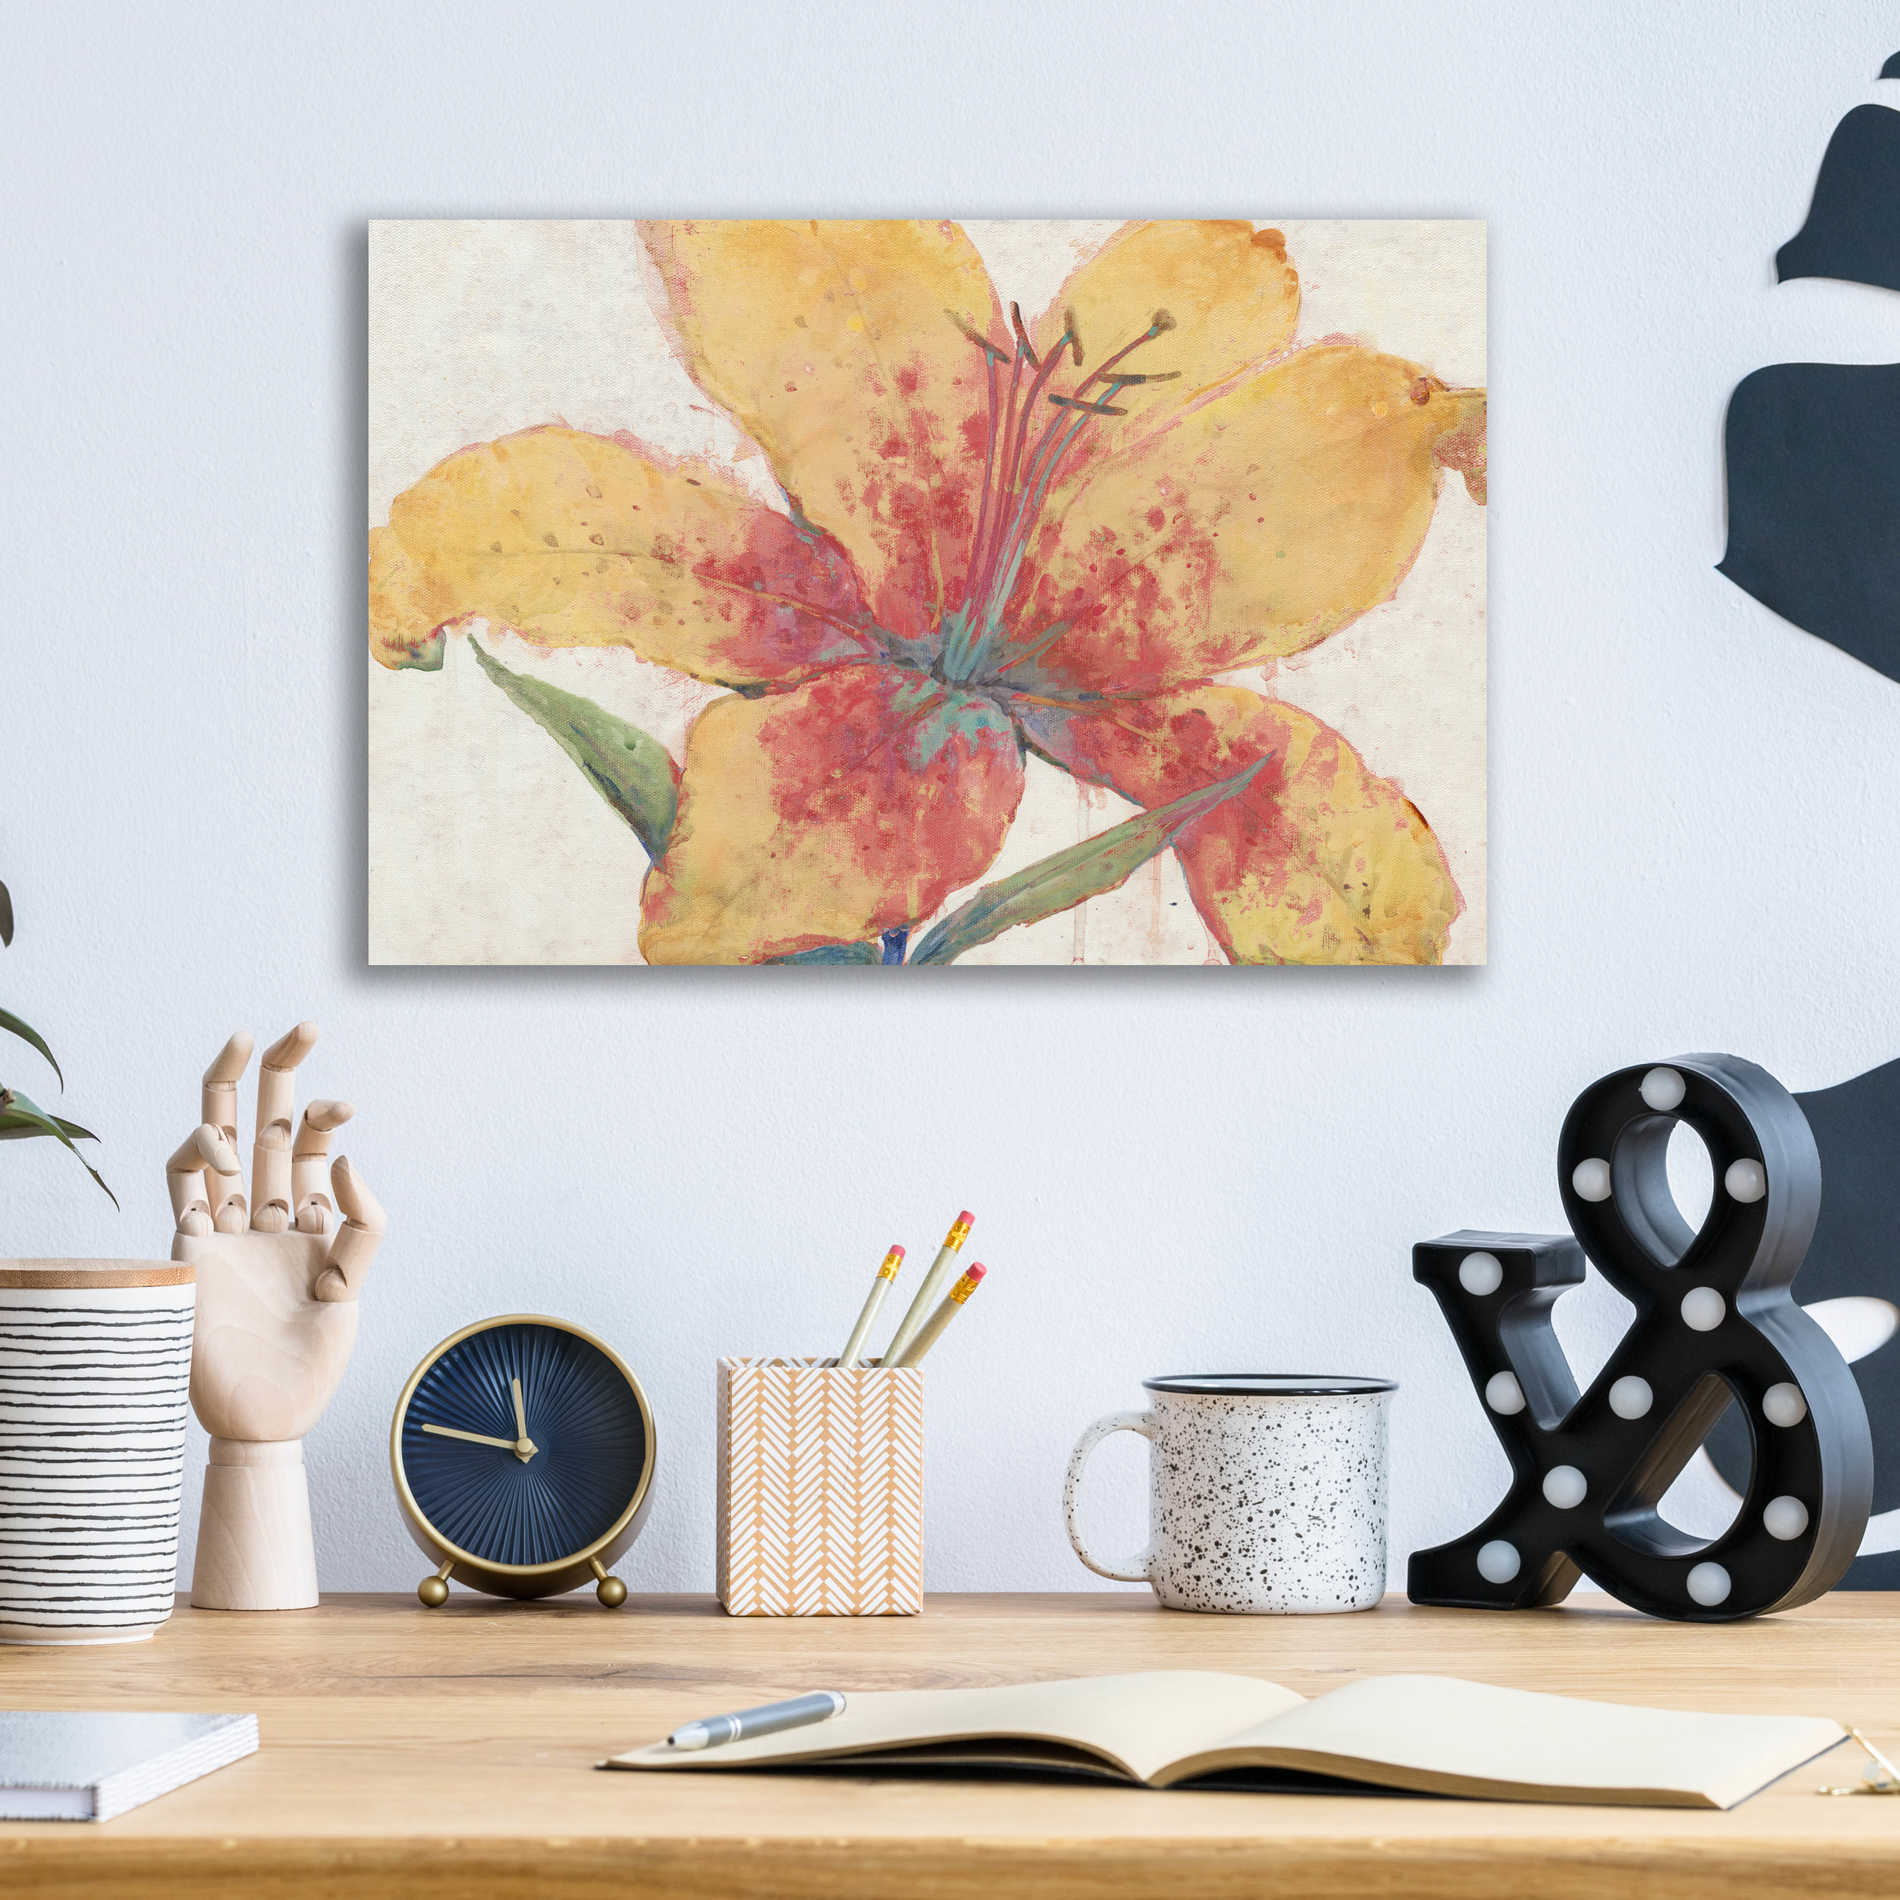 Epic Art 'Blooming Lily' by Tim O'Toole, Acrylic Glass Wall Art,16x12